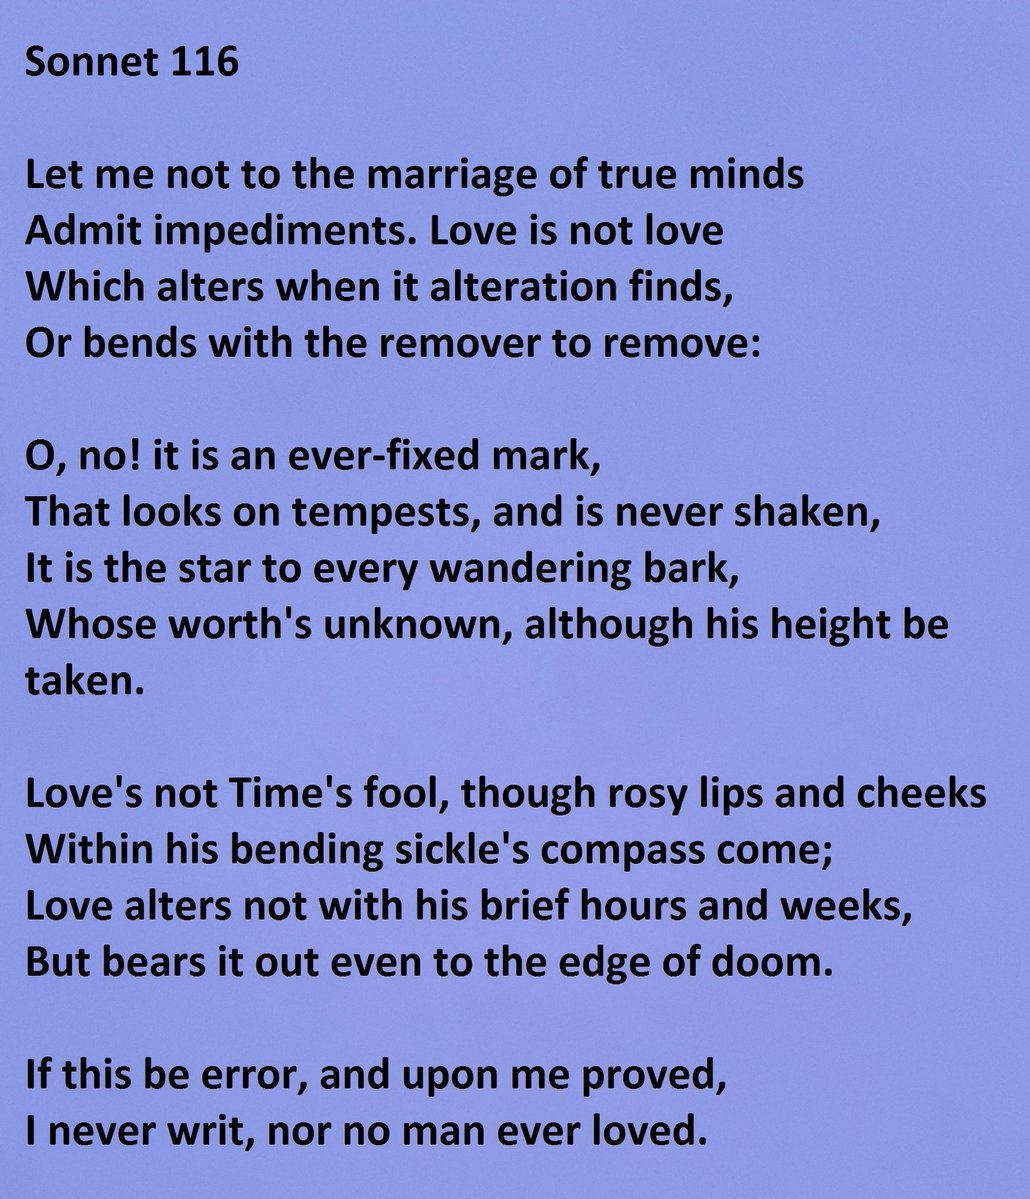 Sonnet 116 by William Shakespeare - "Let me not to the marriage of true minds"